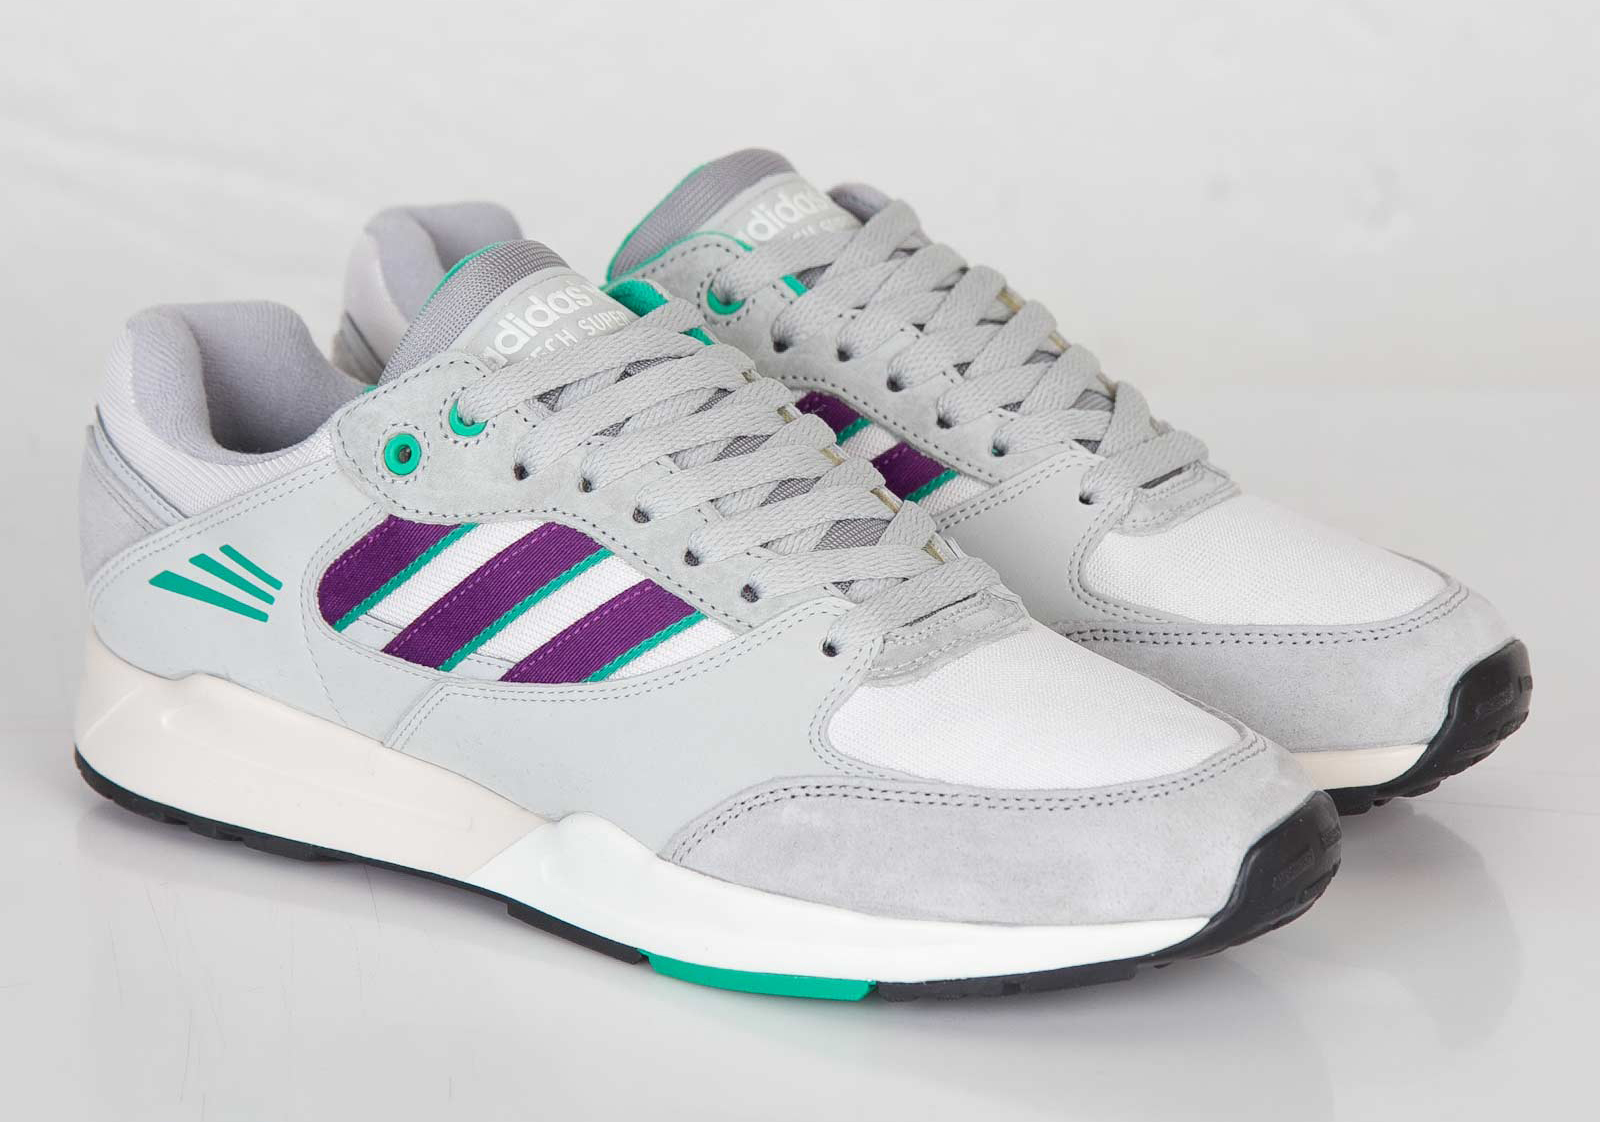 adidas Tech Super - Running White - Tribe Purple - Aluminum - Available